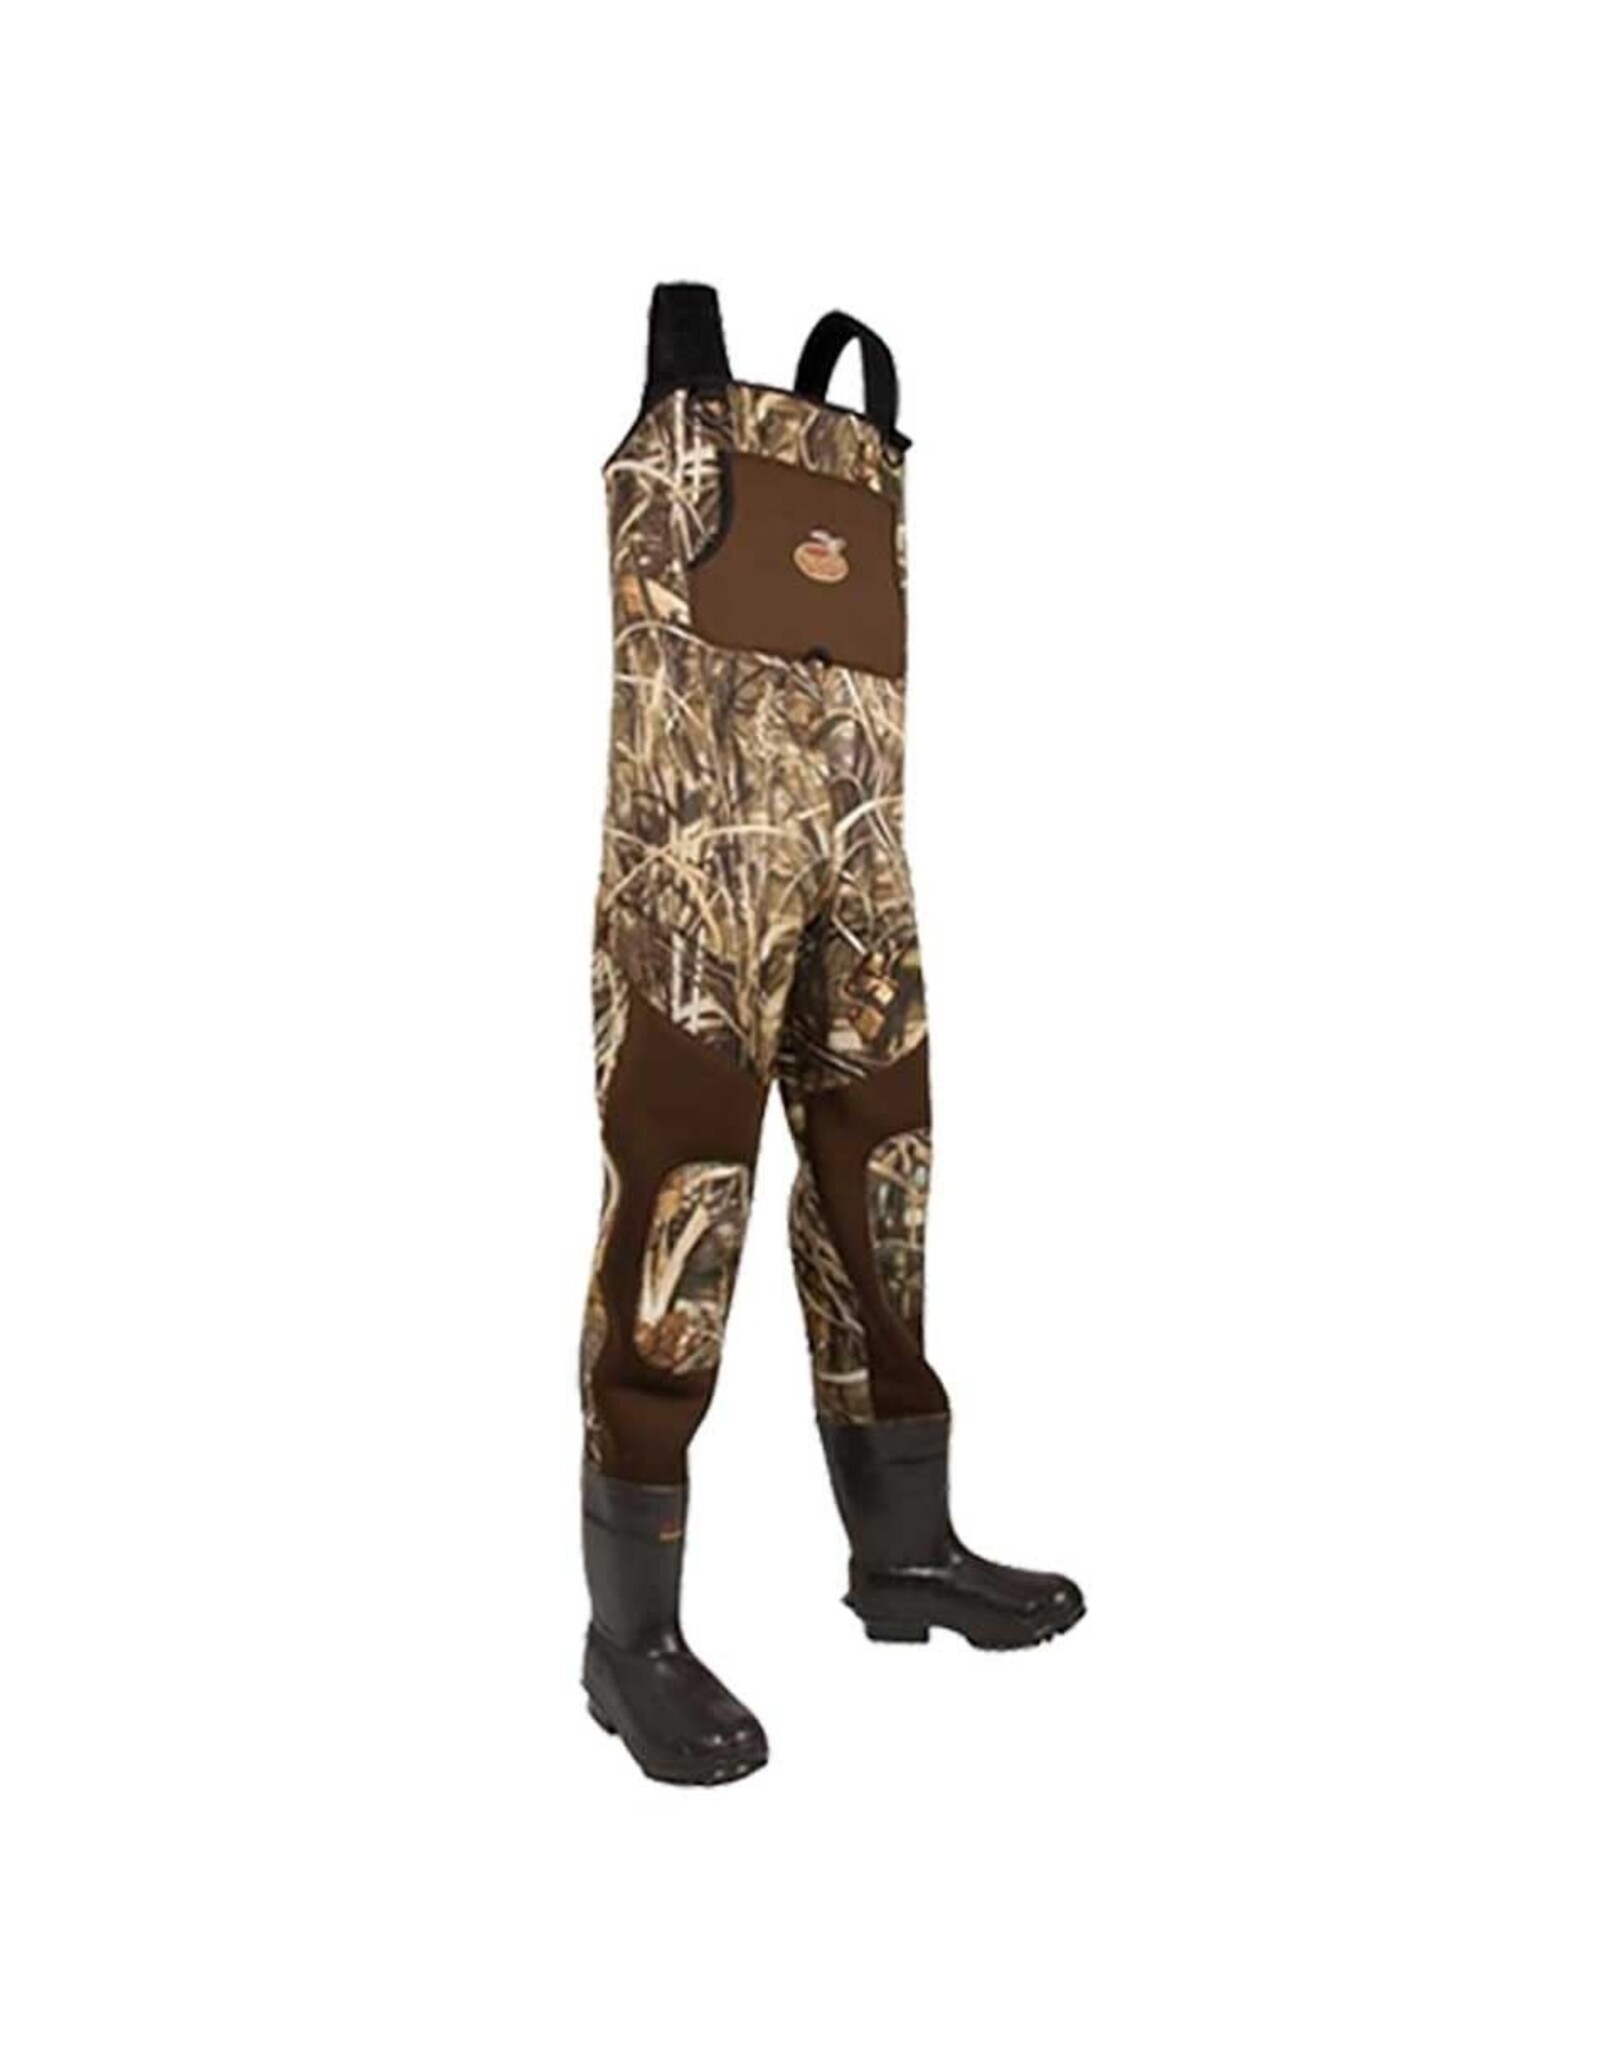 Caddis Men's SIZE 7 - 600Gr - Caddis Wading Systems 3.5mm Max5 Neoprene Bootfoot Chest Youth Waders